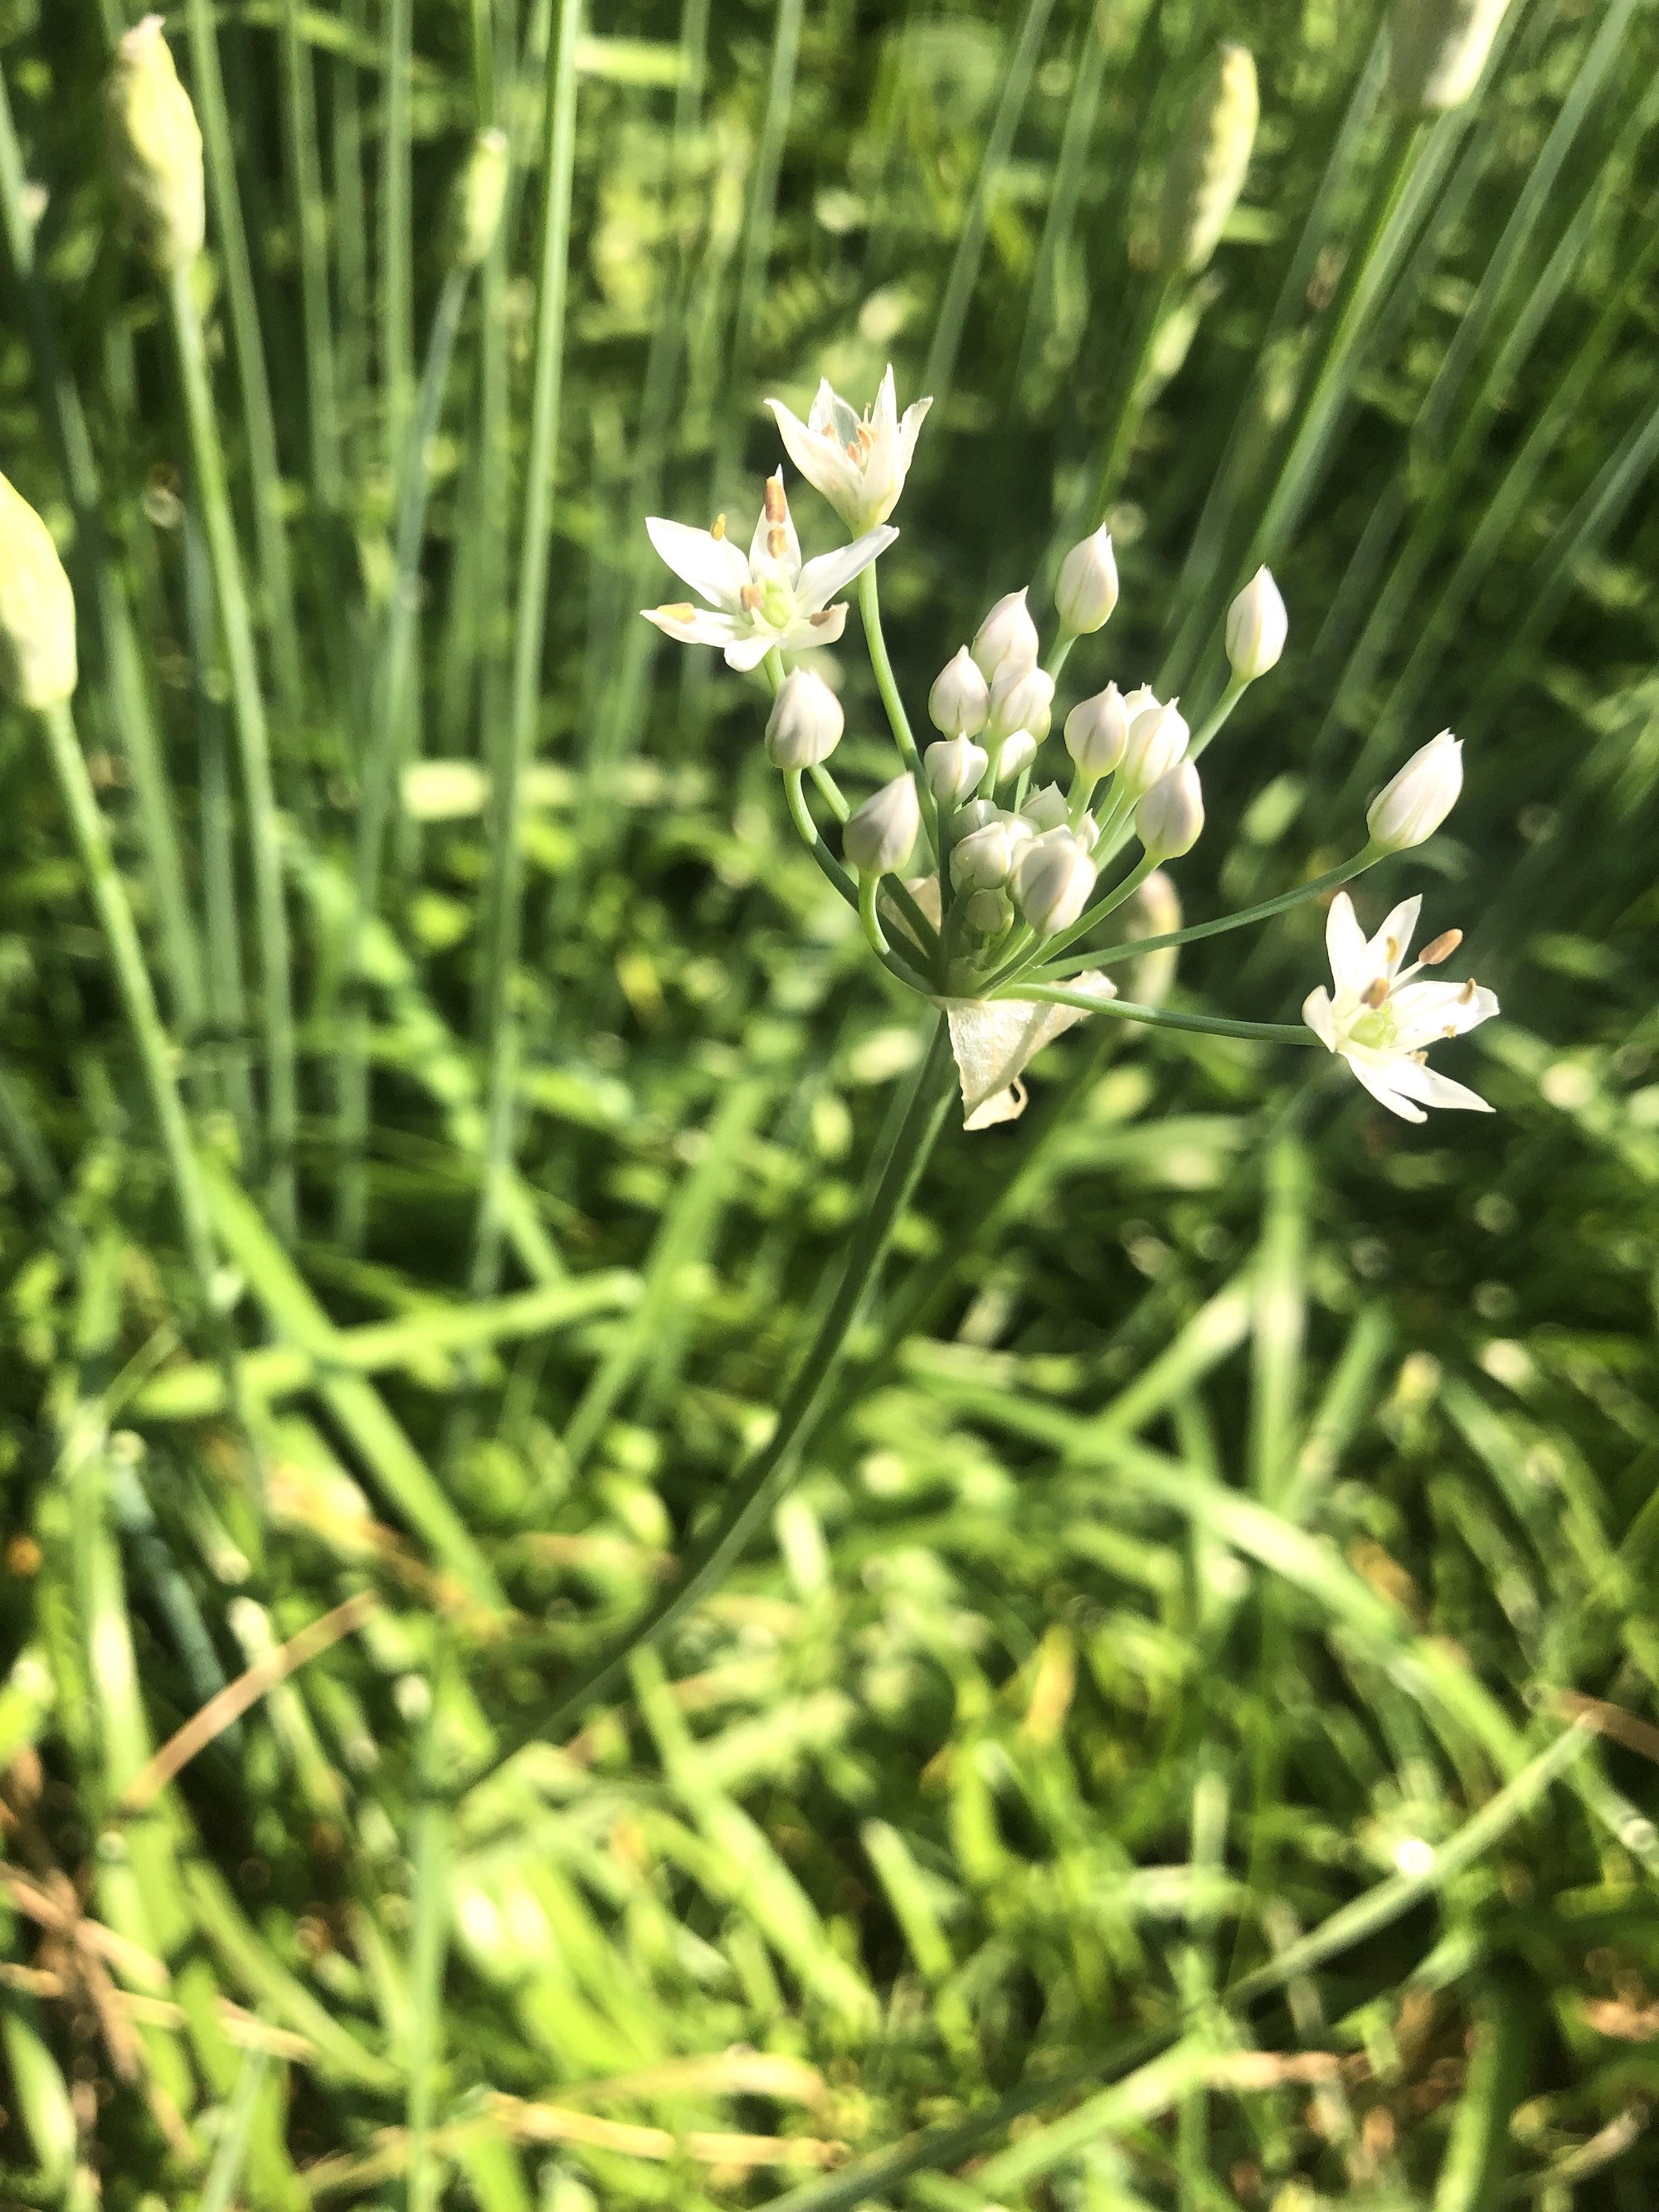 Garlic Chives in ditch along bikepath behind Fox Avenue in Madison, Wisconsin on August 18, 2021.